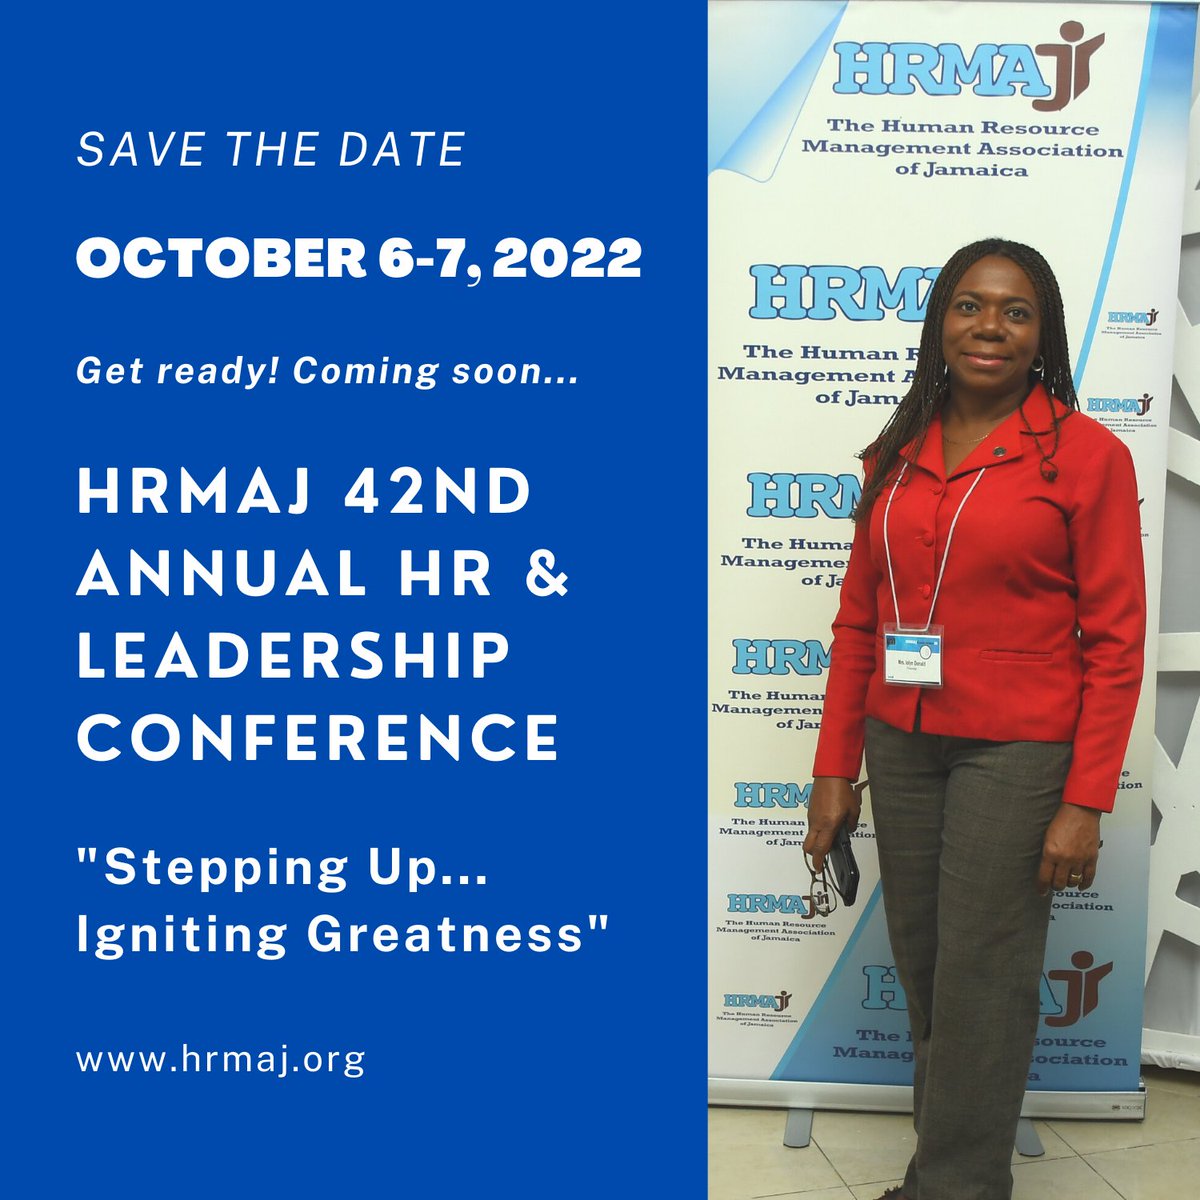 Get ready for HRMAJ Conference42!
Be sure to save the date, October 6-7, 2022.
You don't want to miss it!
#HRMAJC42 #hr #hrconference #humanresource #humanresourcemanagement #humanresourcedevelopment #training #traininganddevelopment #personaldevelopment #humancapital